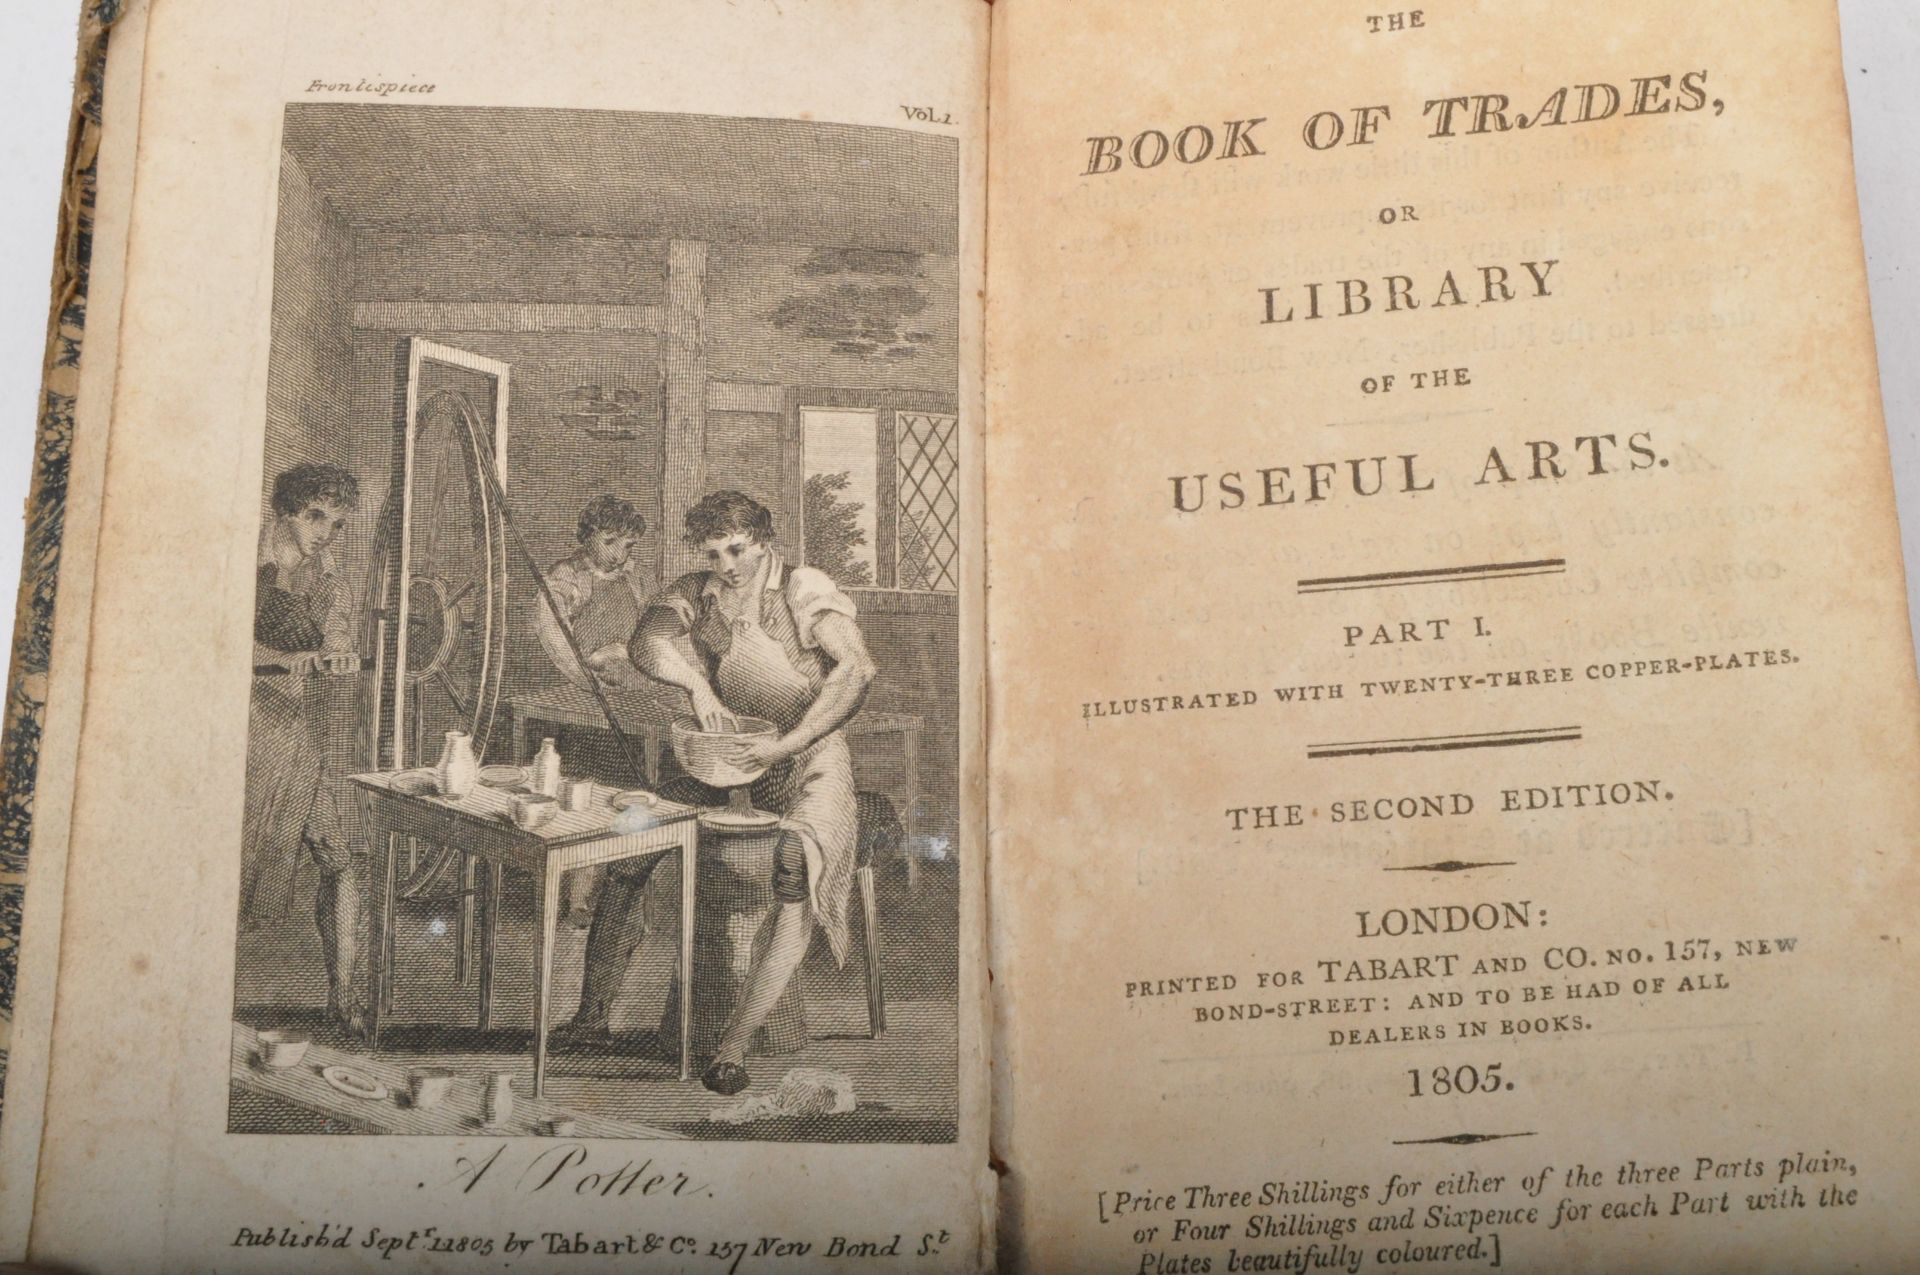 THE BOOK OF TRADES / LIBRARY OF USEFUL ARTS - 1805 - ILLUSTRATED - Image 2 of 5